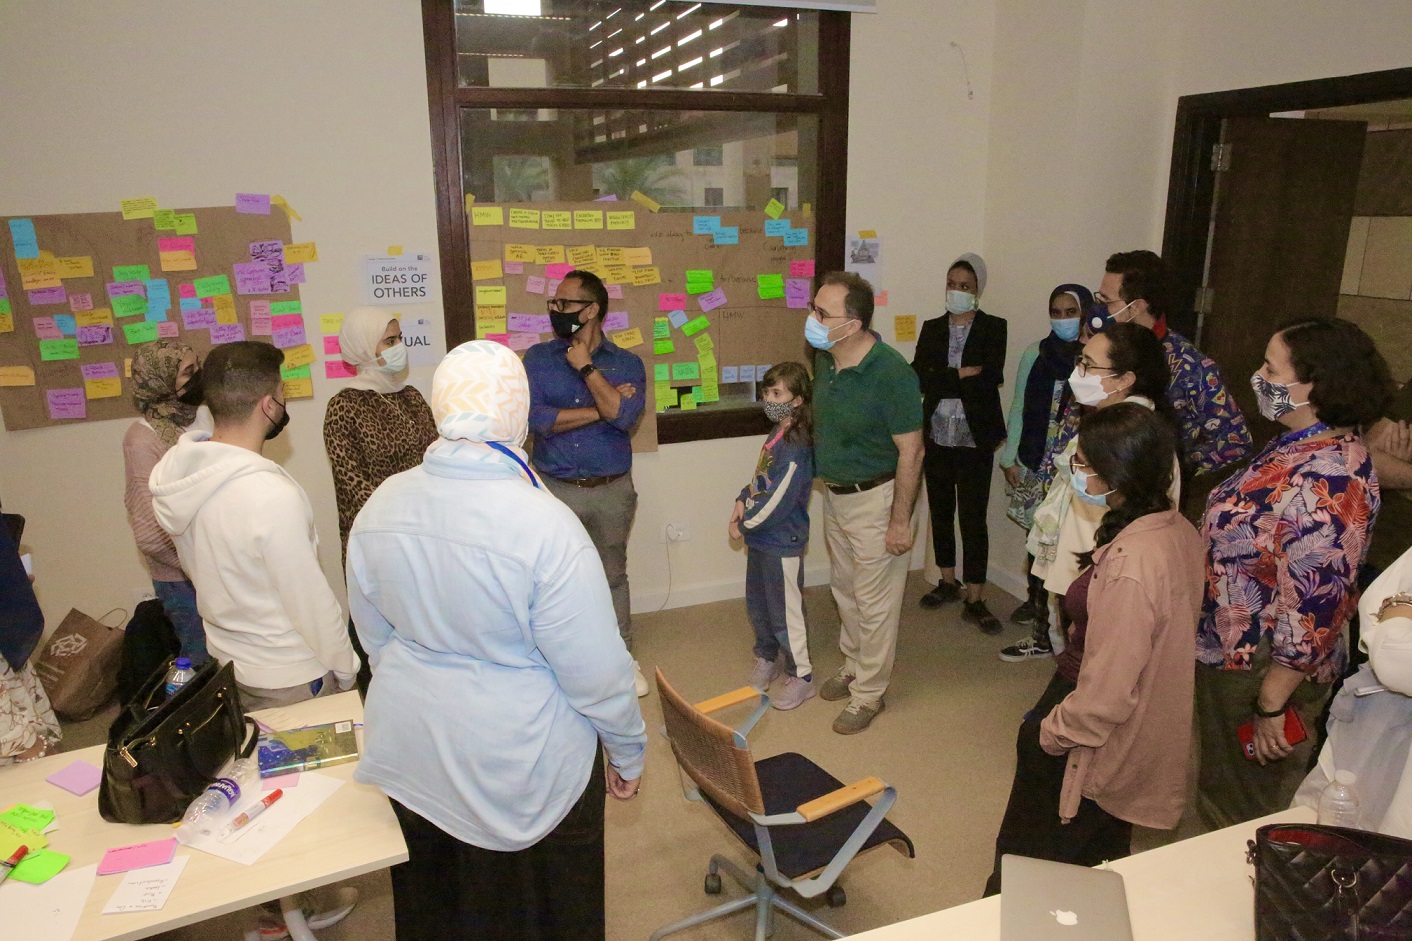 AUC President Ahmad Dallal Visits Students at AUC Design Thinking Second Challenge